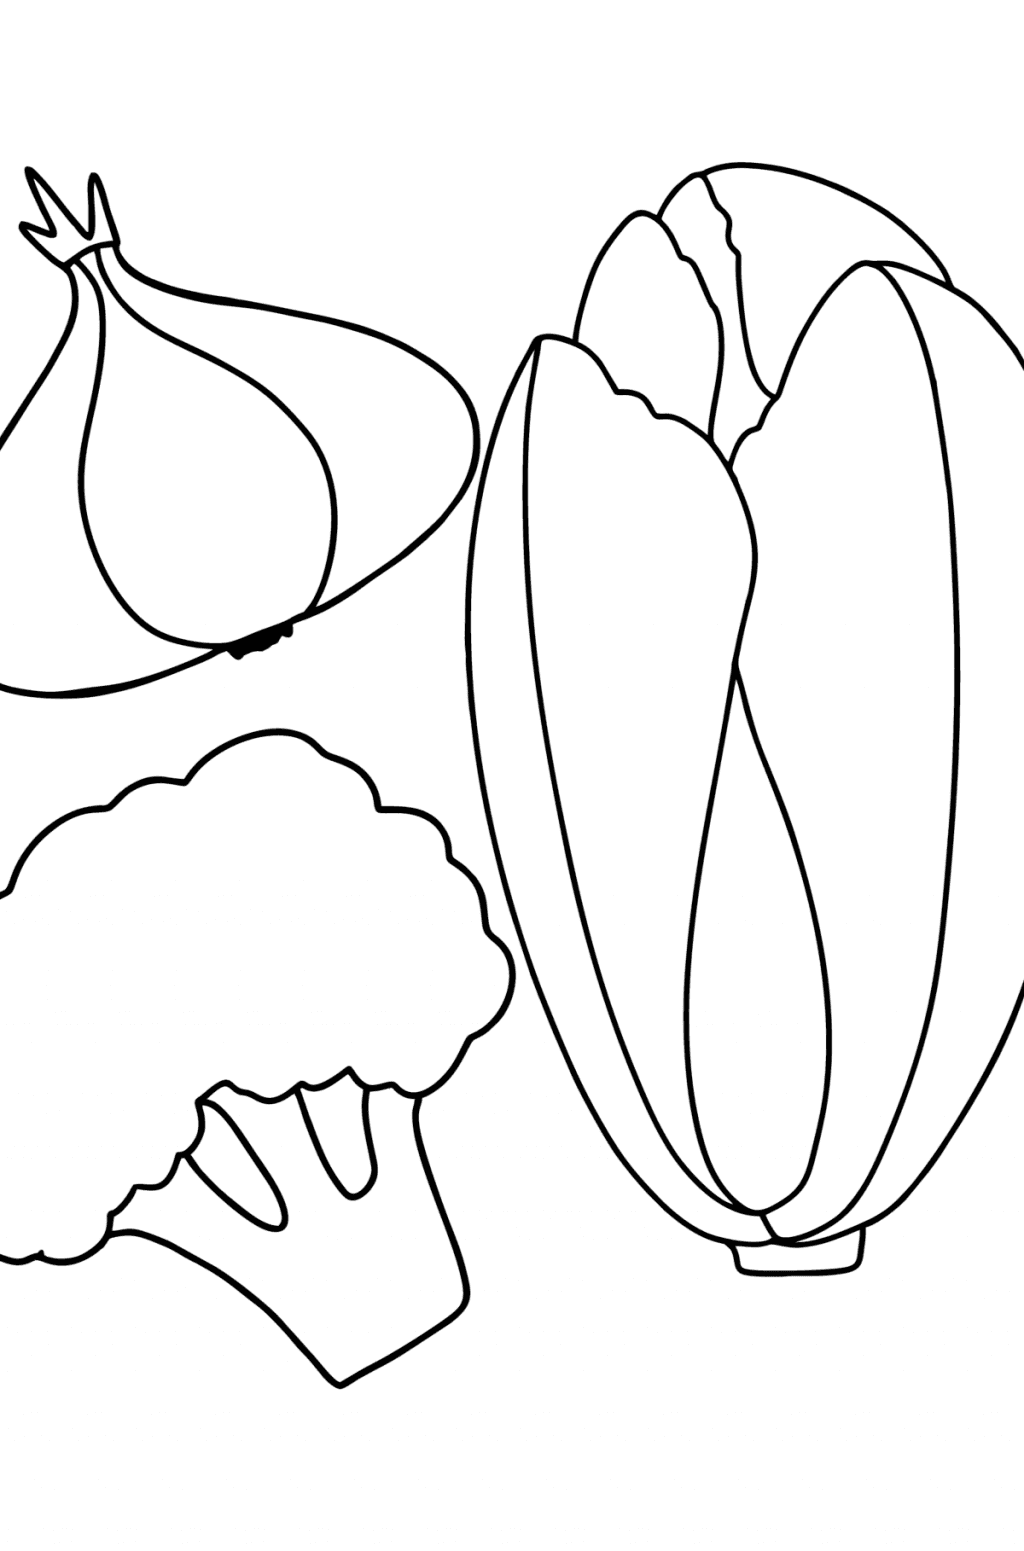 coloring-pages-for-toddlers-online-and-print-for-free